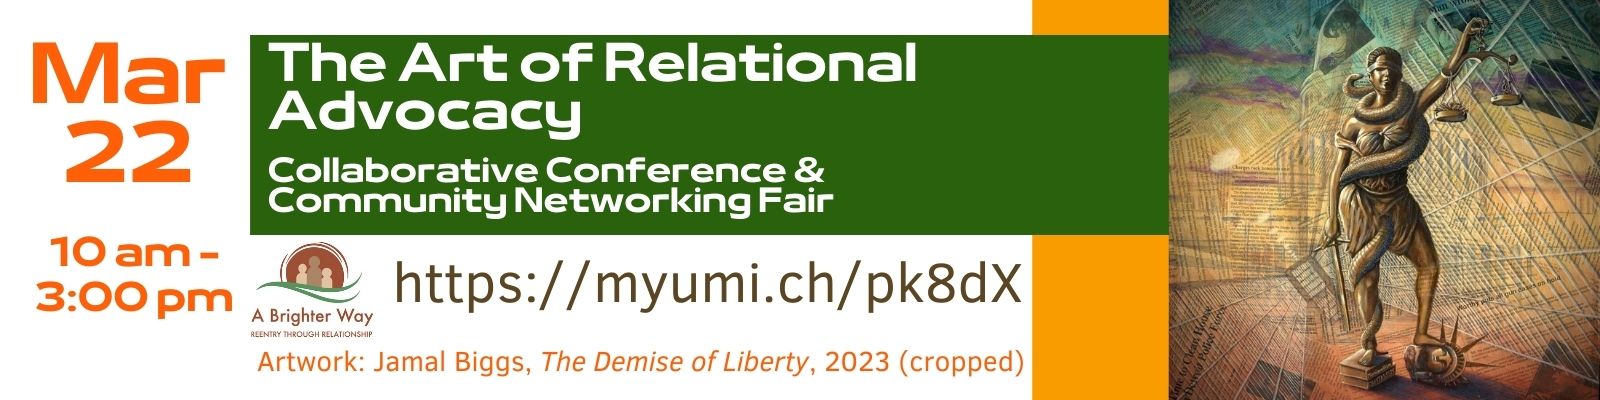 link to Art of Relational Advocacy Conference website